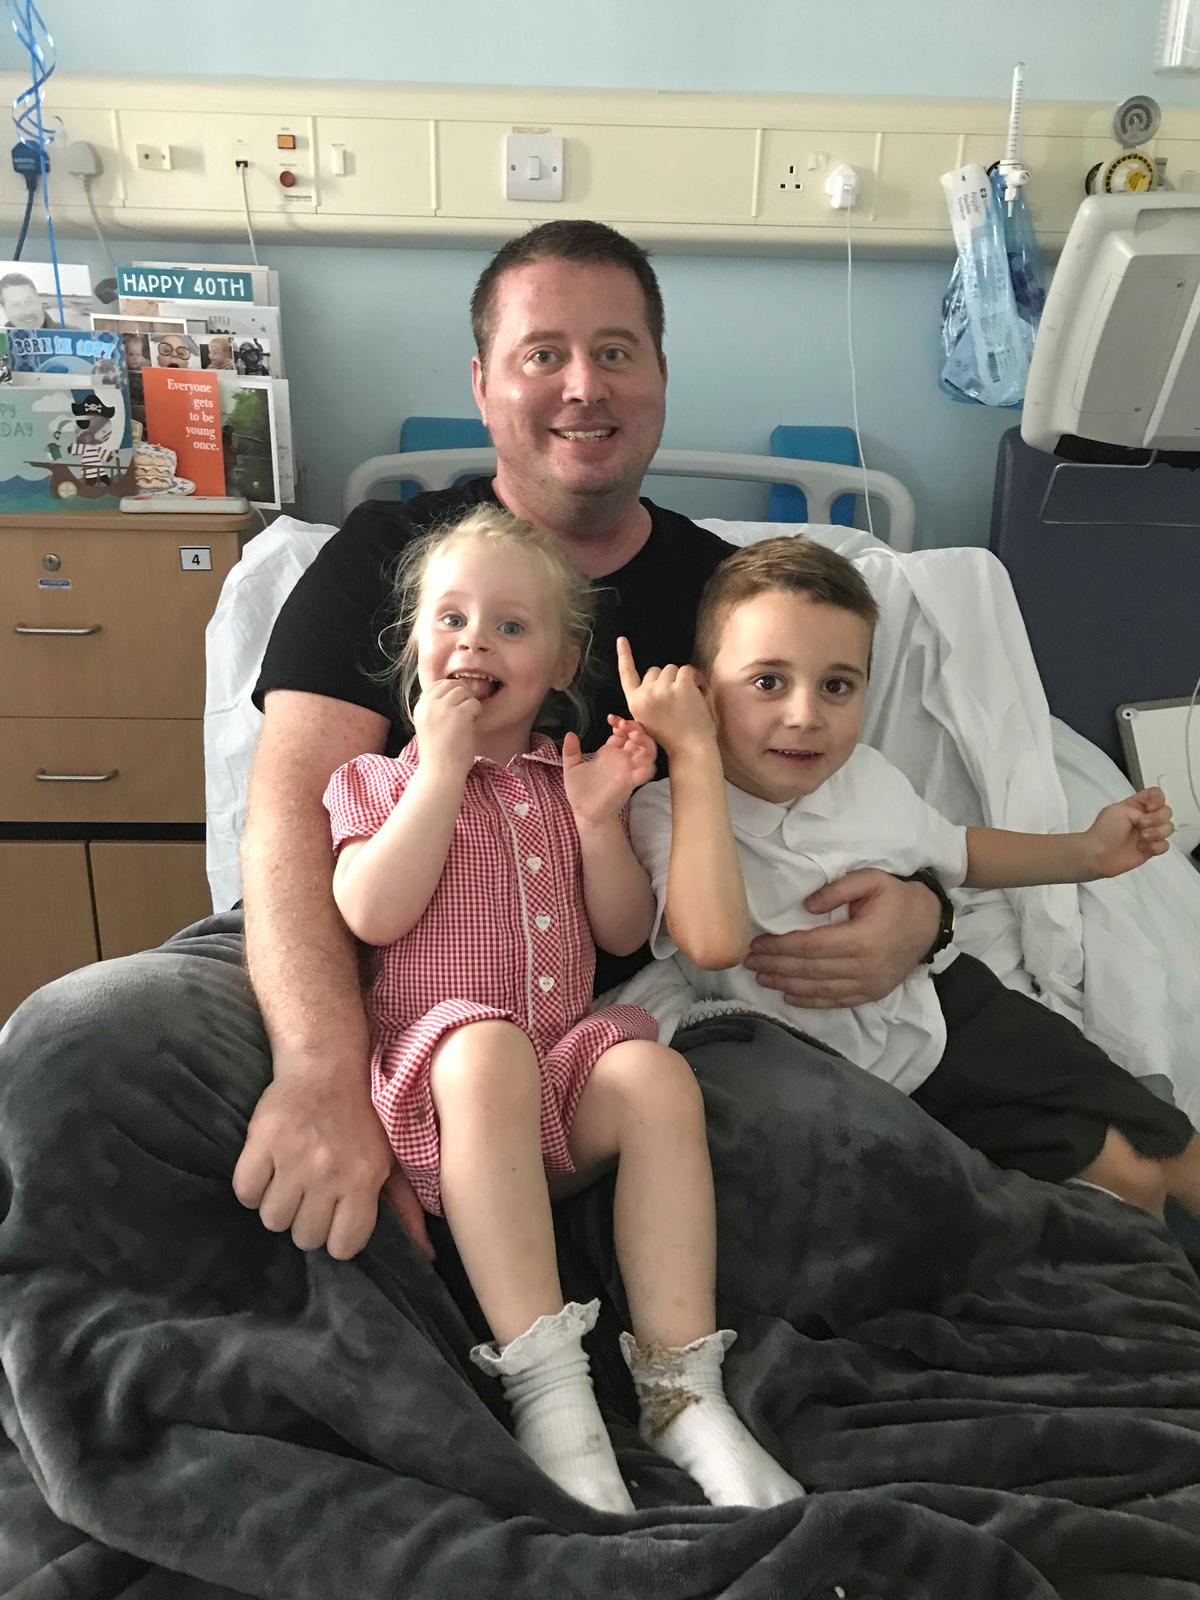 Jonathon Sheldon, 45, with his children Holland, 6, and Harrison, 8 (Caters News)